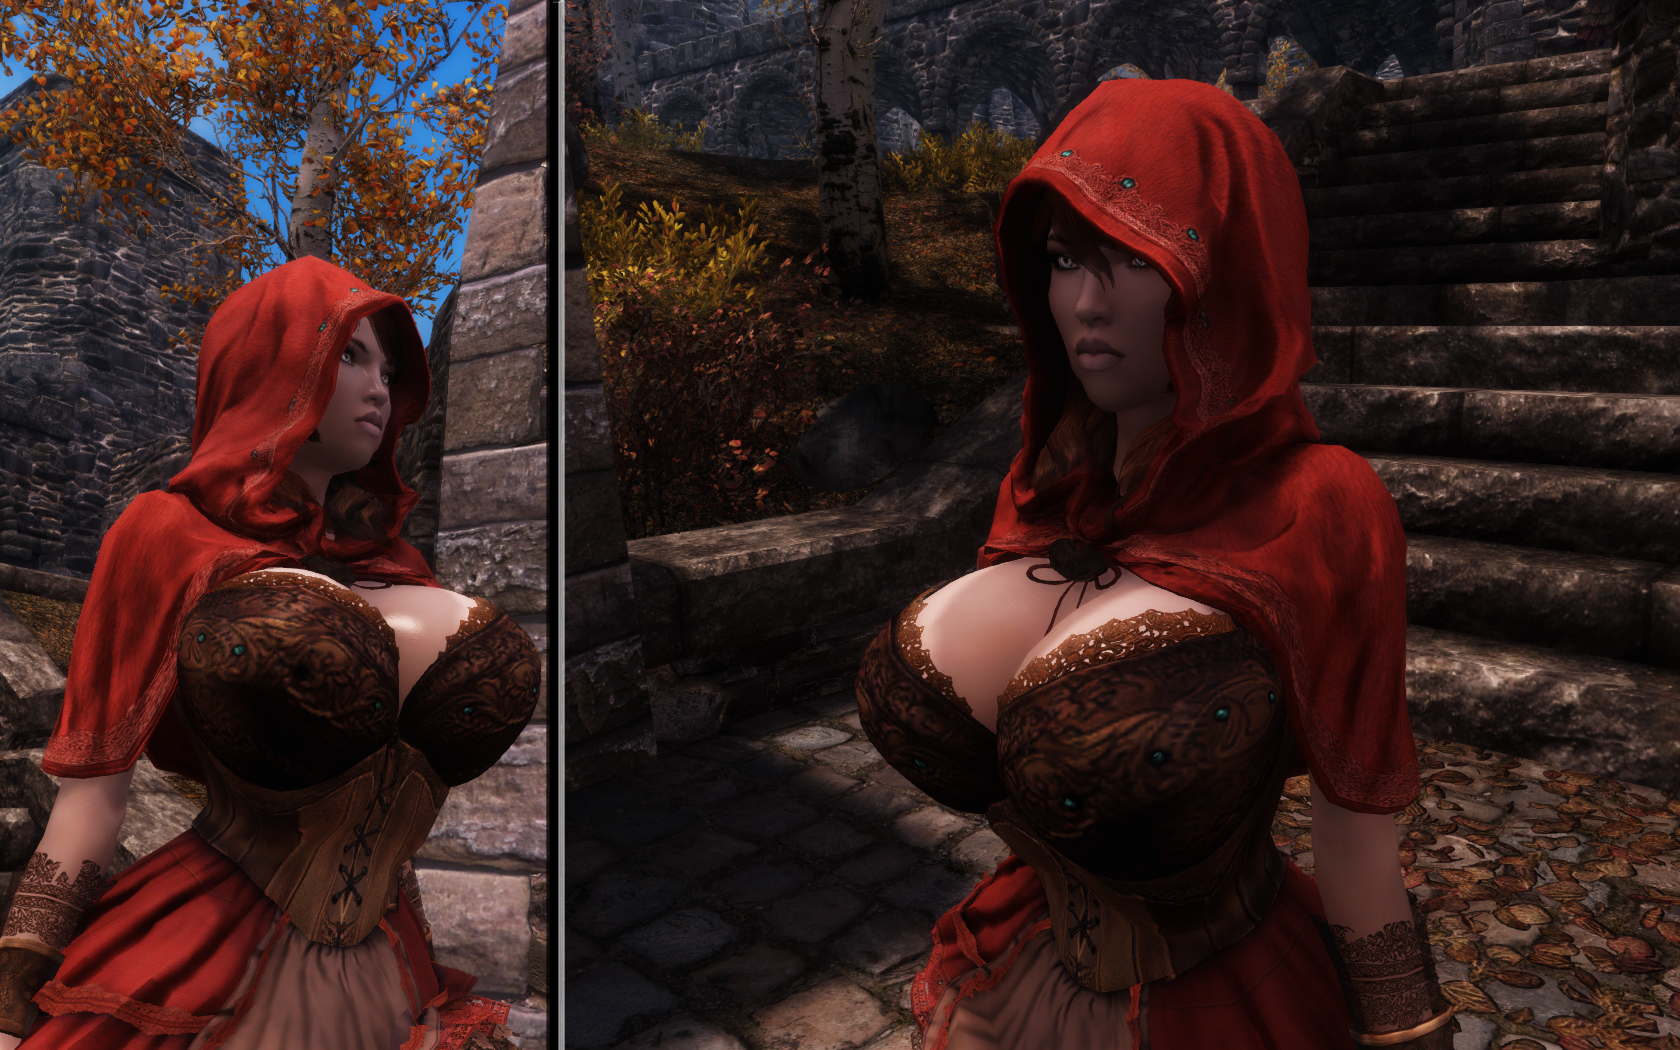 I've been trying to find armor mods for Skyrim that have frilly skirts...